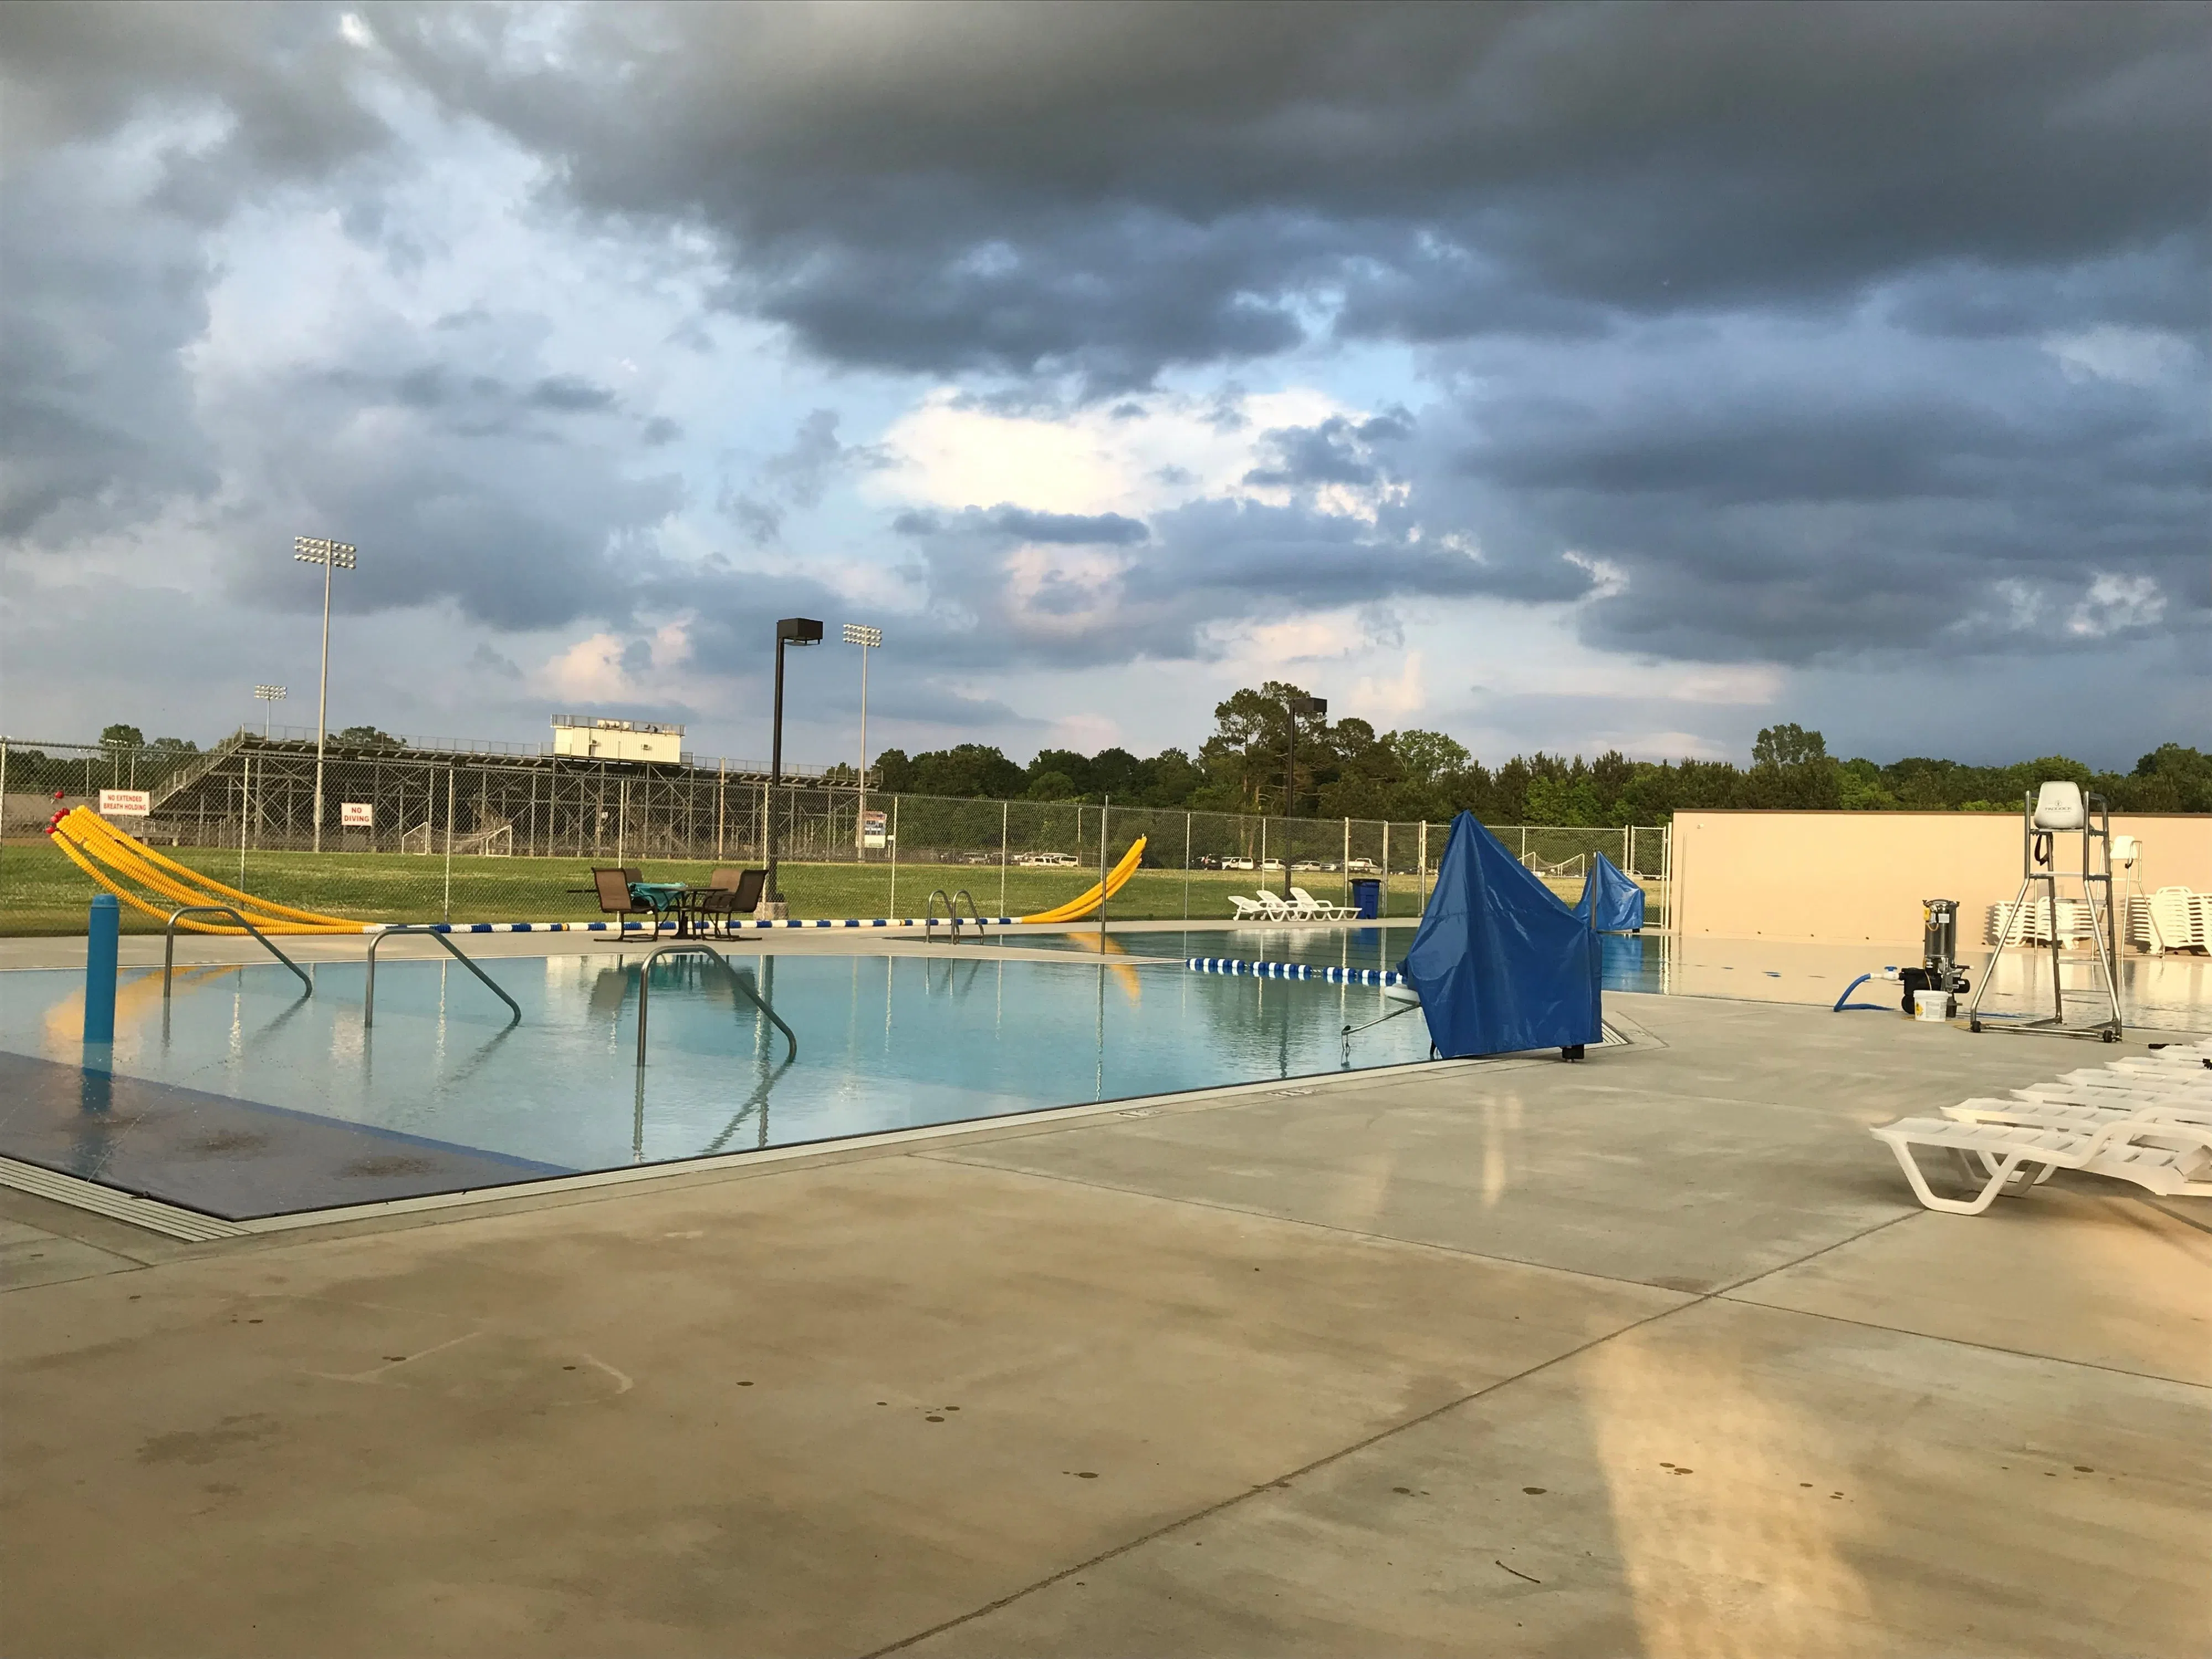 Adams County supervisors seek to revive disbanded swimming pool commission